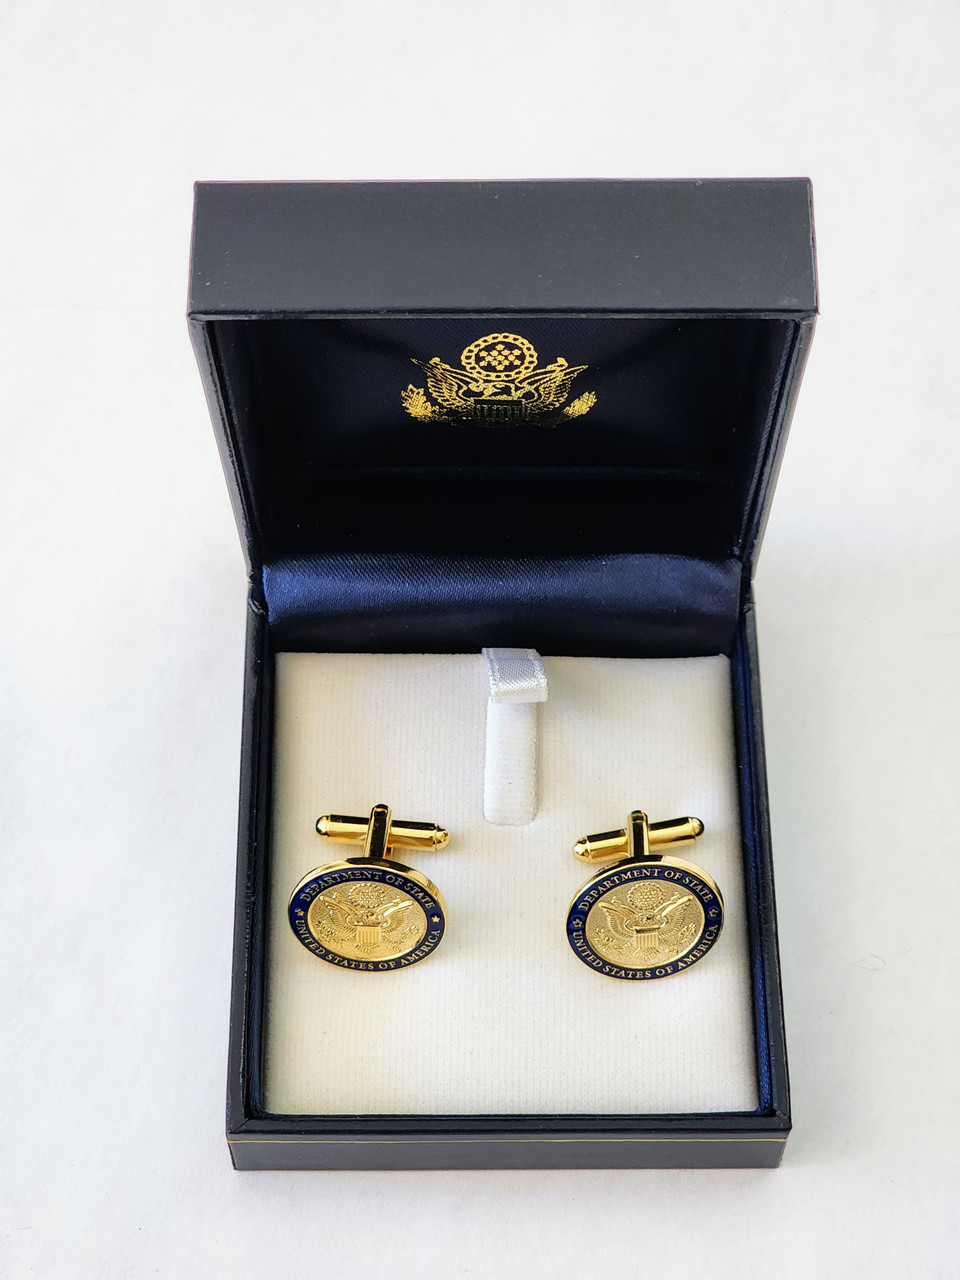 DOS Cufflinks - Gold or Silver Finished in Leatherette